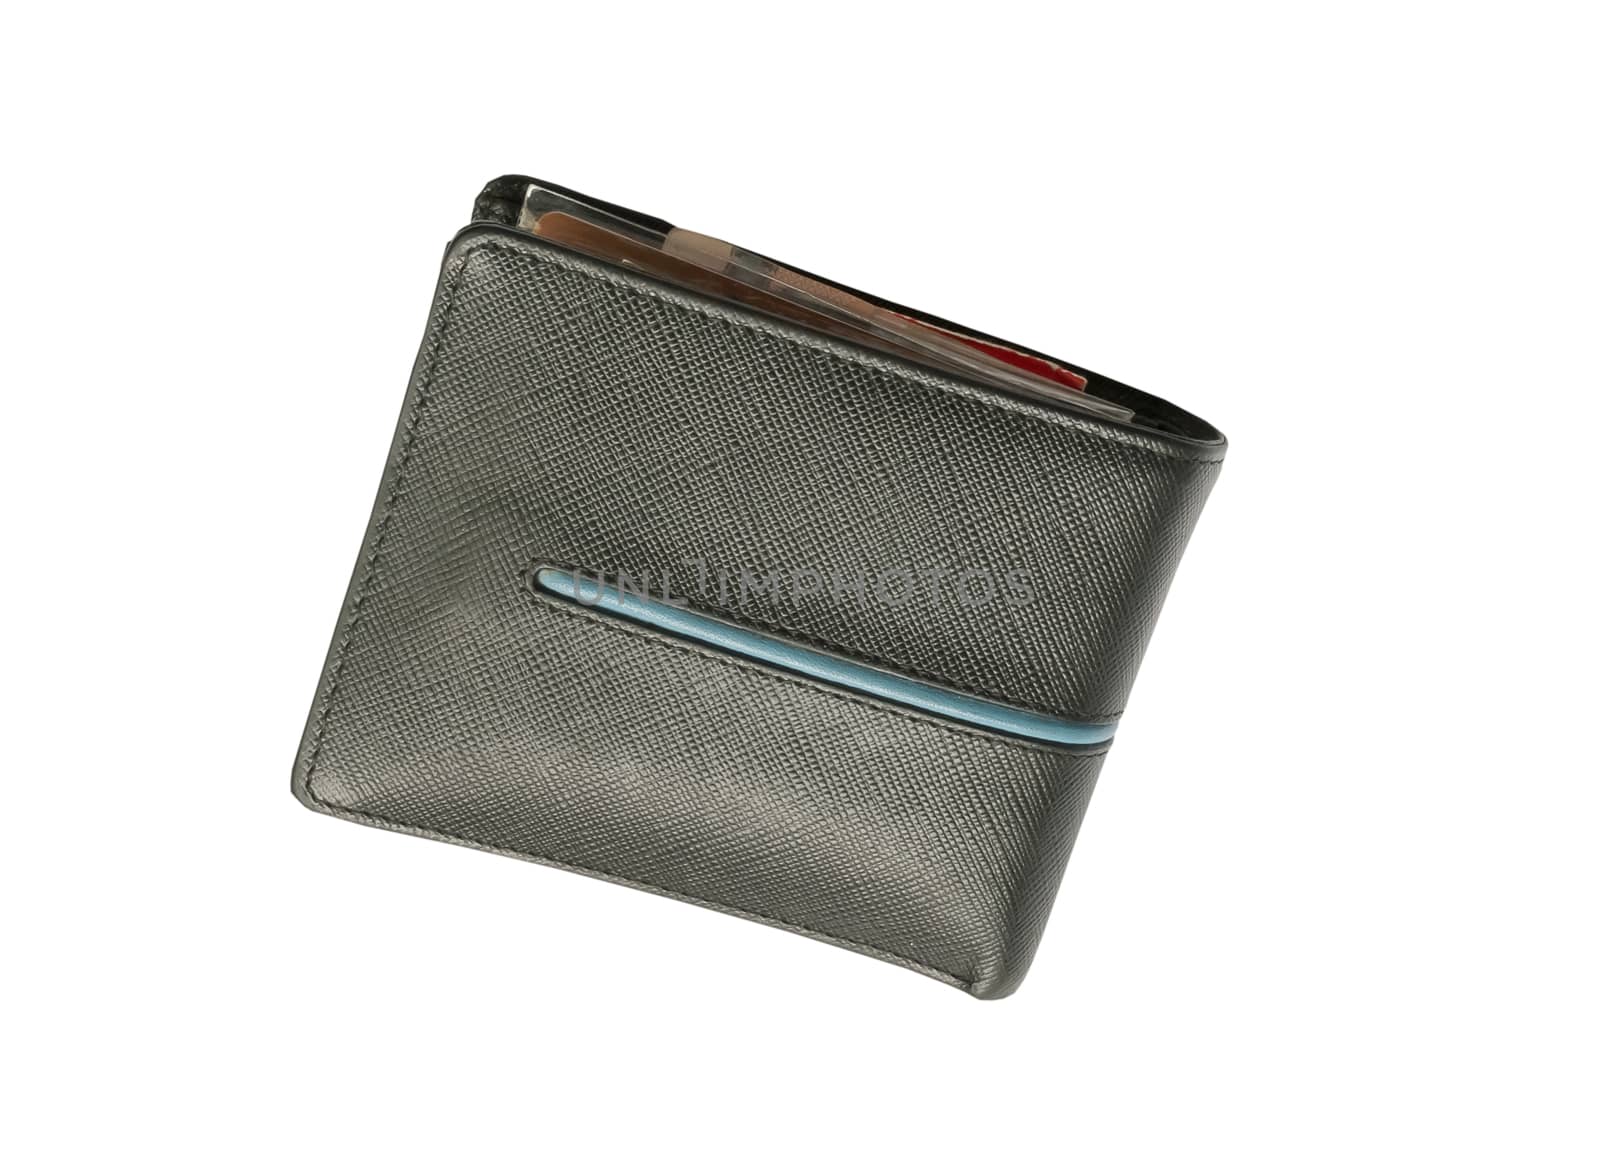 men's leather wallet isolated on white background  by suthee